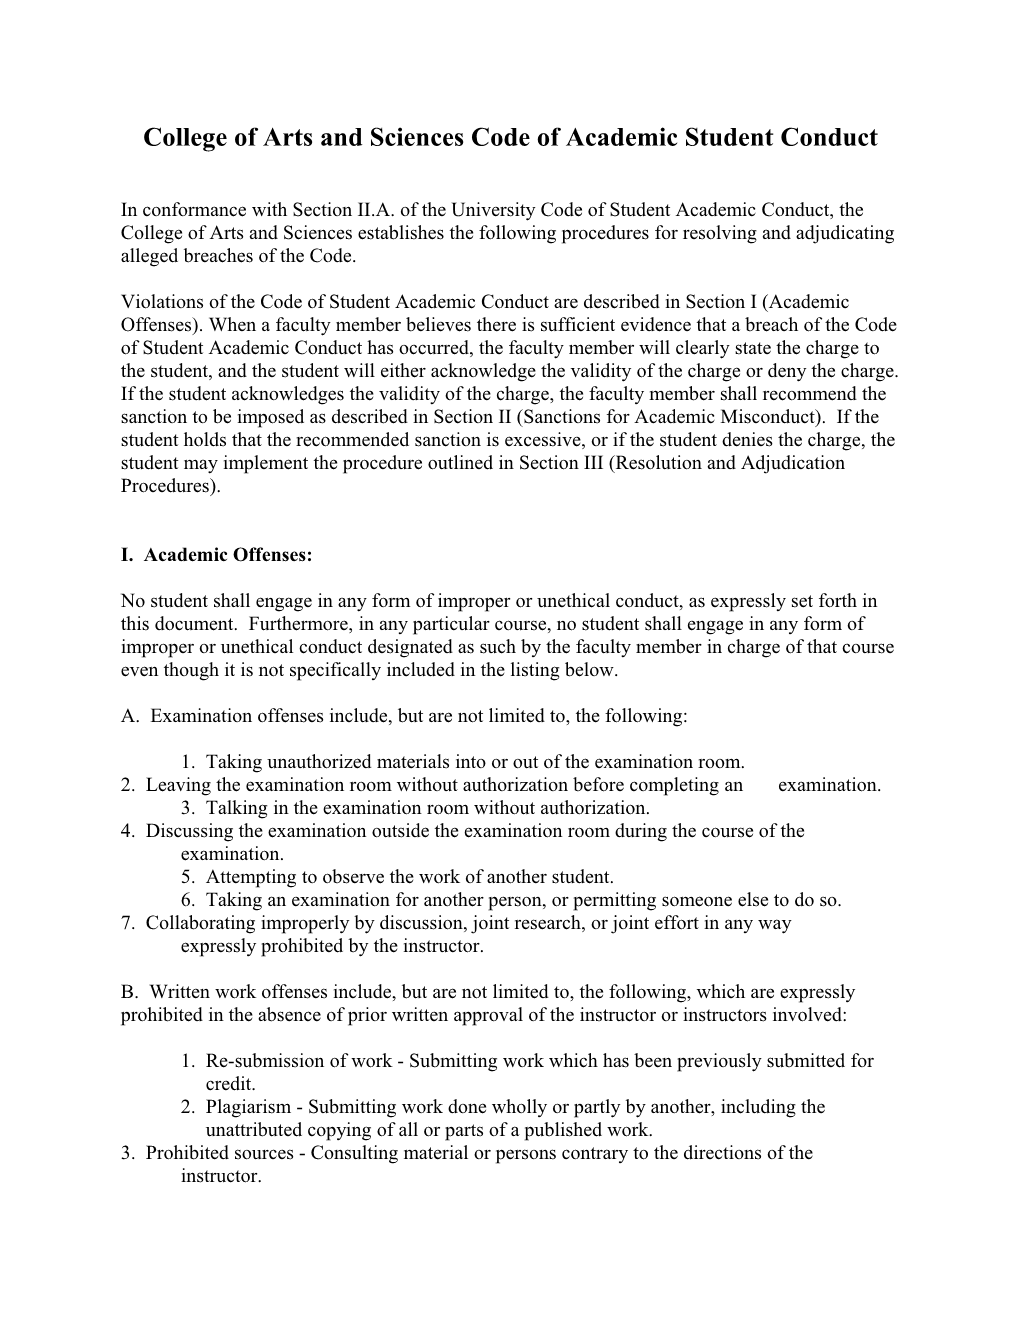 College of Arts and Sciences Code of Academic Student Conduct